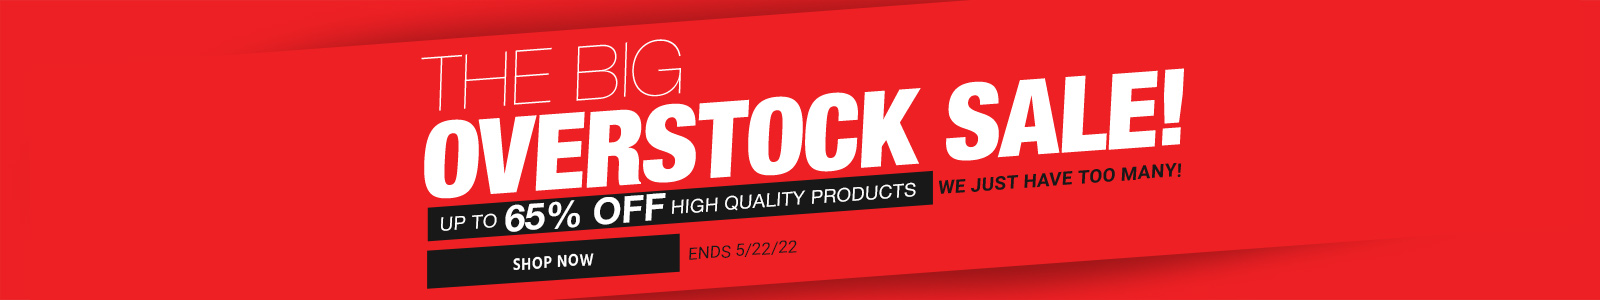 The Big Overstock Sale!
Up to XX% off high quality products
We just have too many!
Ends 5/22/22
Shop Now